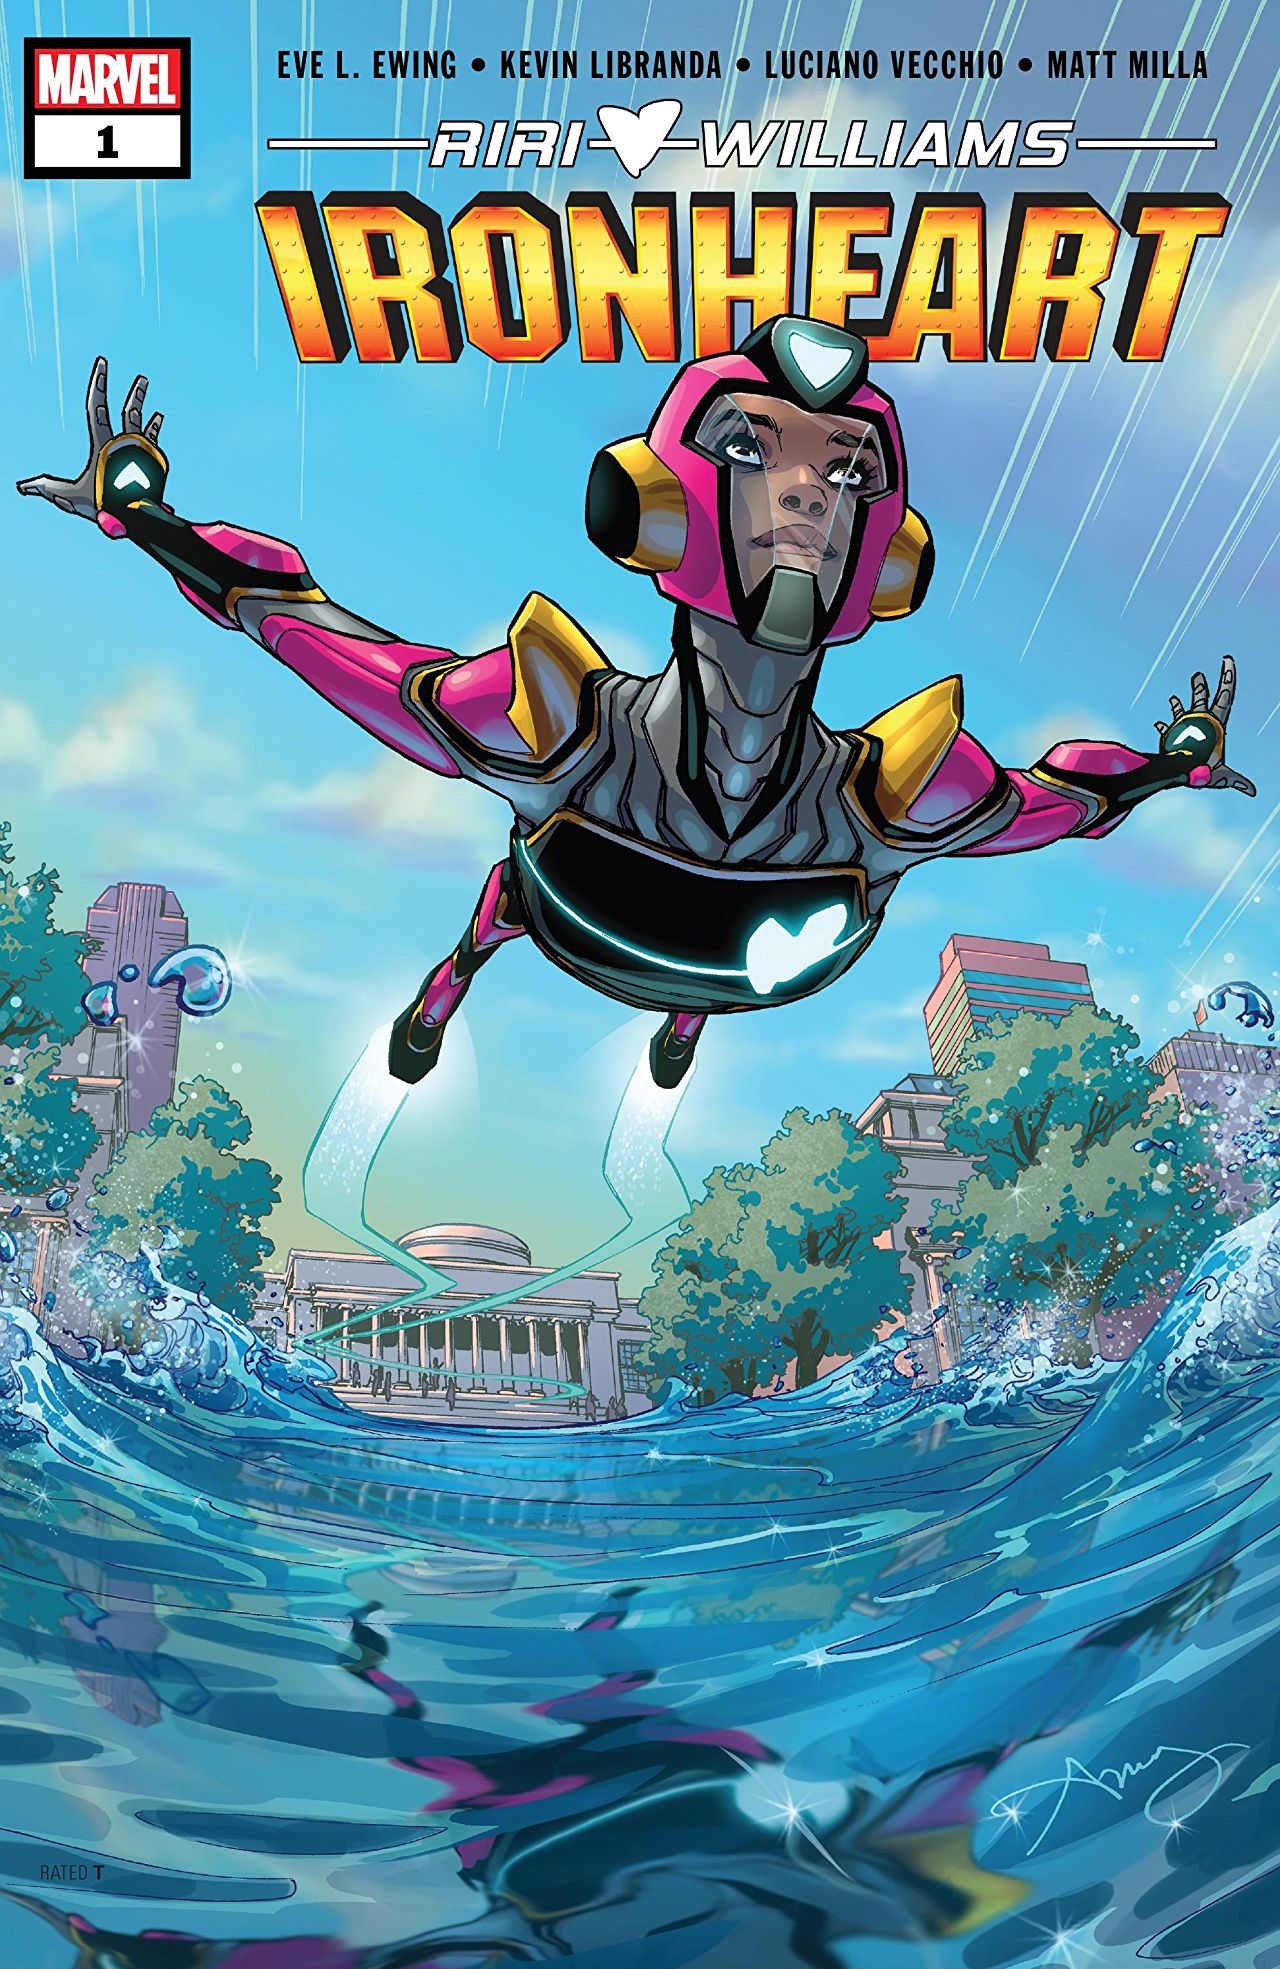 Marvel Preview: Ironheart #1